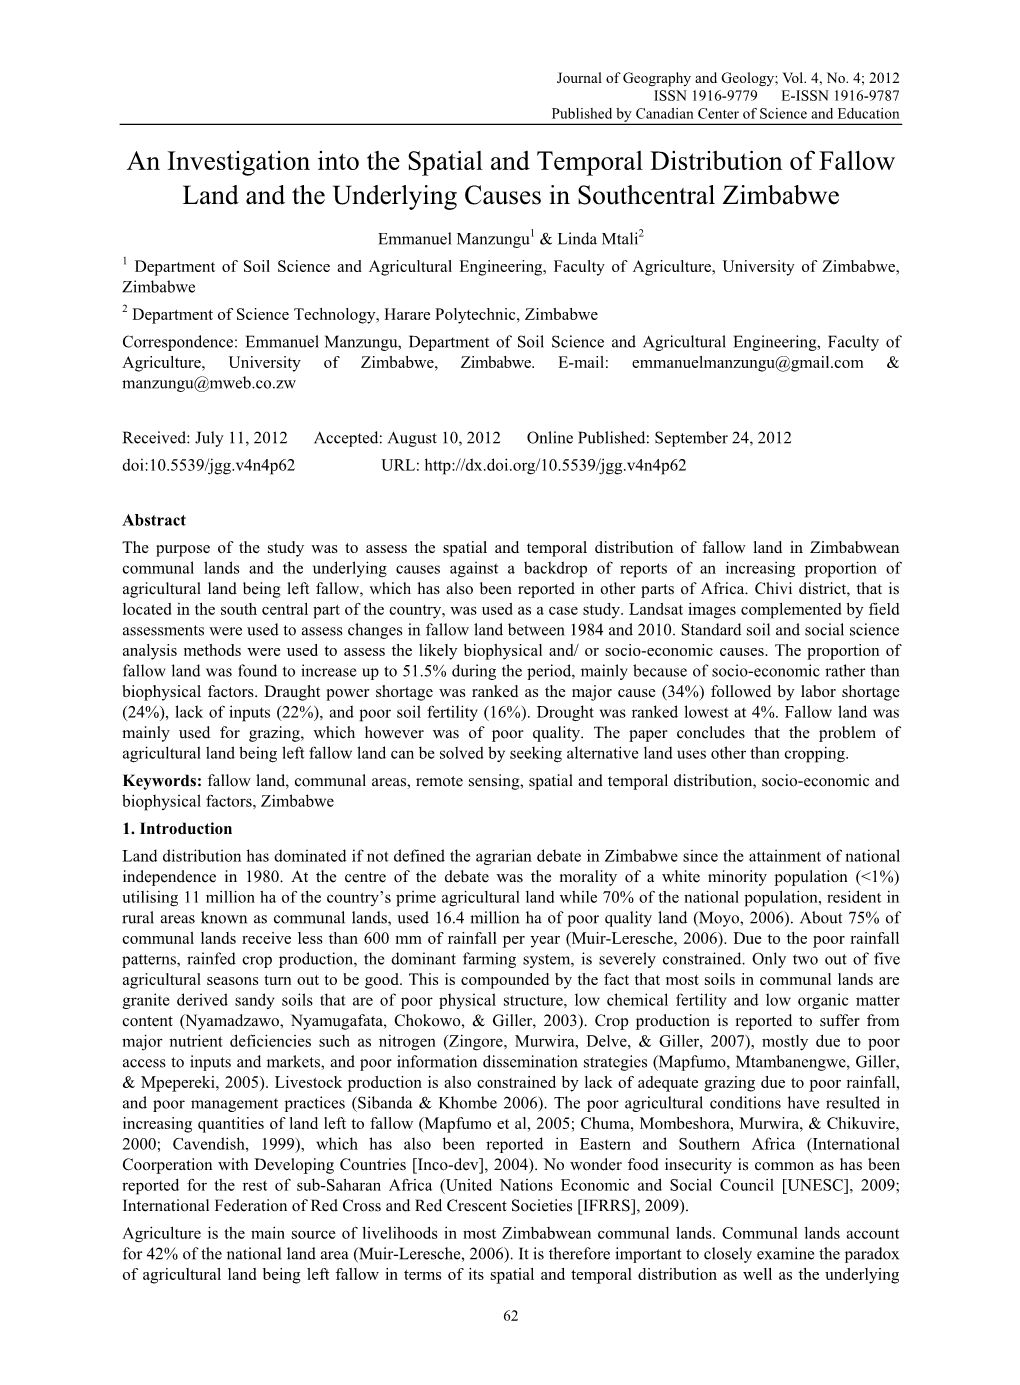 An Investigation Into the Spatial and Temporal Distribution of Fallow Land and the Underlying Causes in Southcentral Zimbabwe